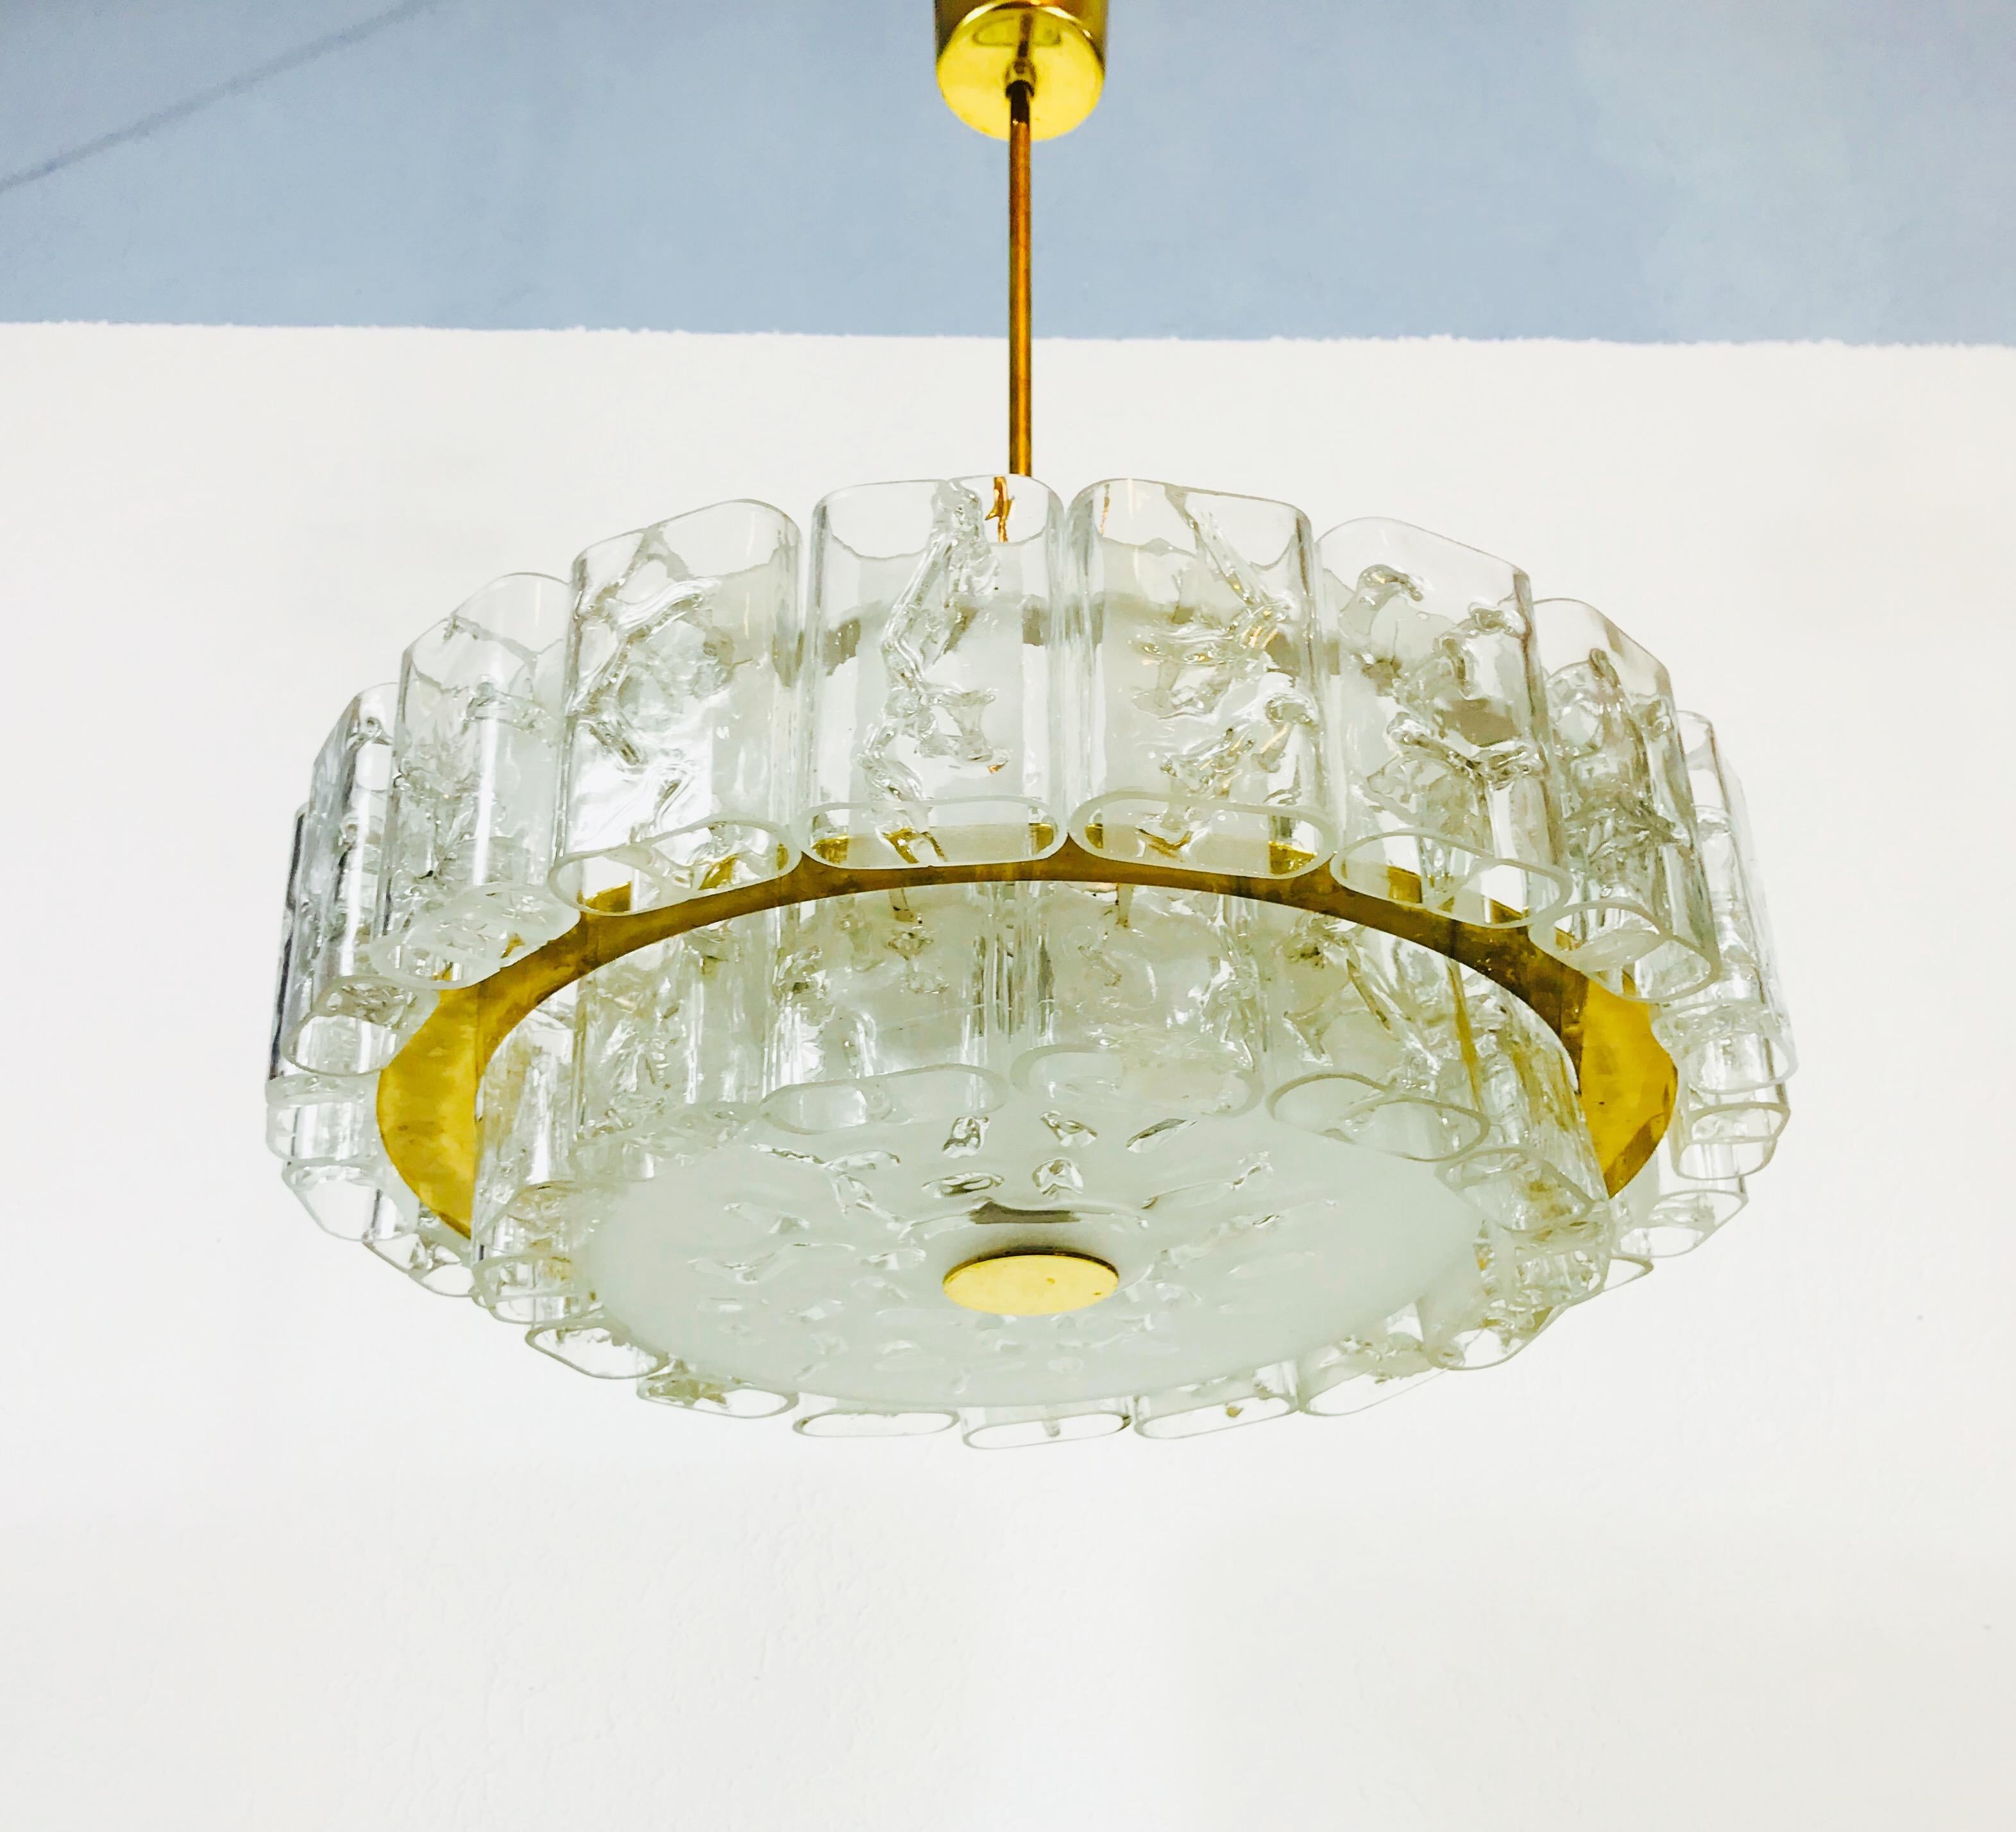 A Doria ice glass chandelier made in Germany in the 1960s. It is fascinating with its rare glass shapes. A bras body with a brass bar. There is a frosted glass diffuser surrounded by a high polished brass disc. 

The fixture requires four E14